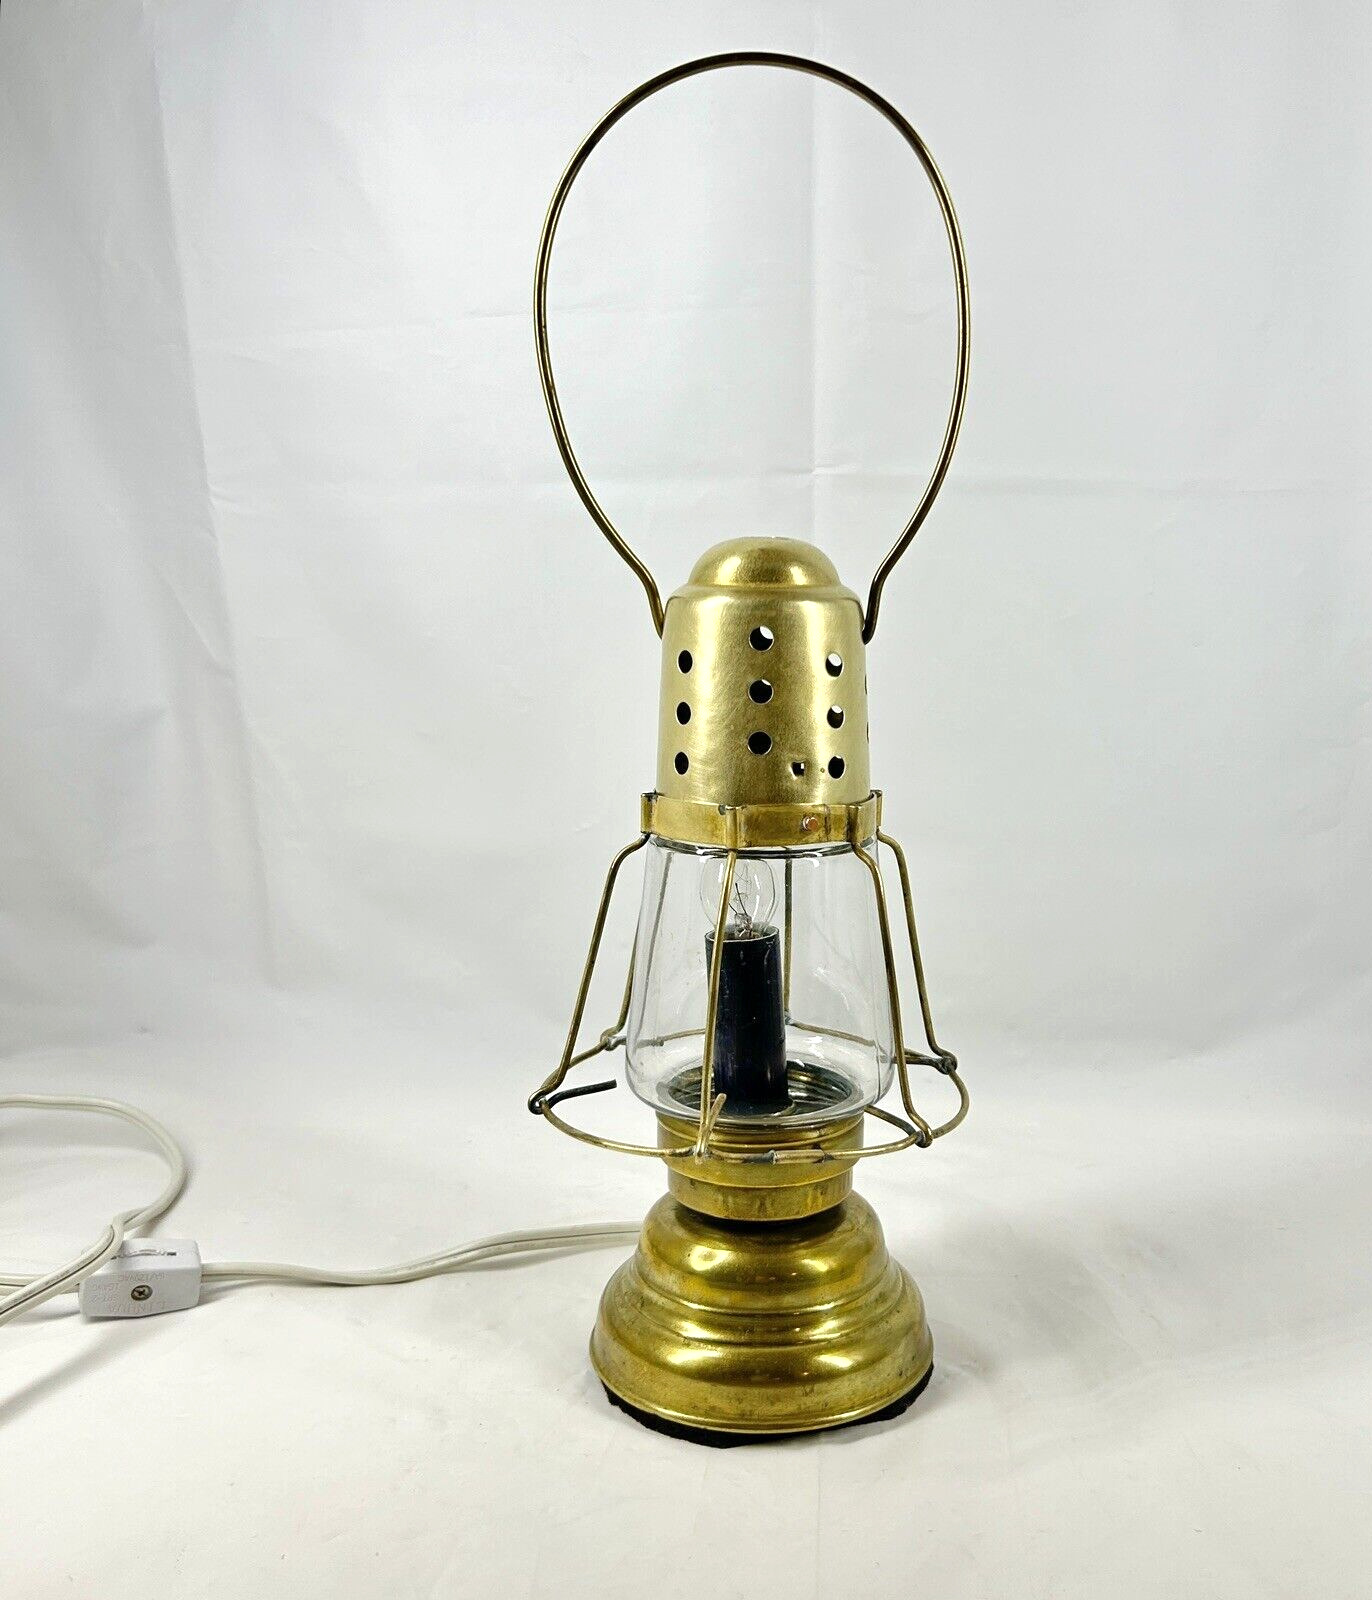 Skaters Oil Lantern Converted To Electric Table Lamp Antique Brass Pat\'d 1837